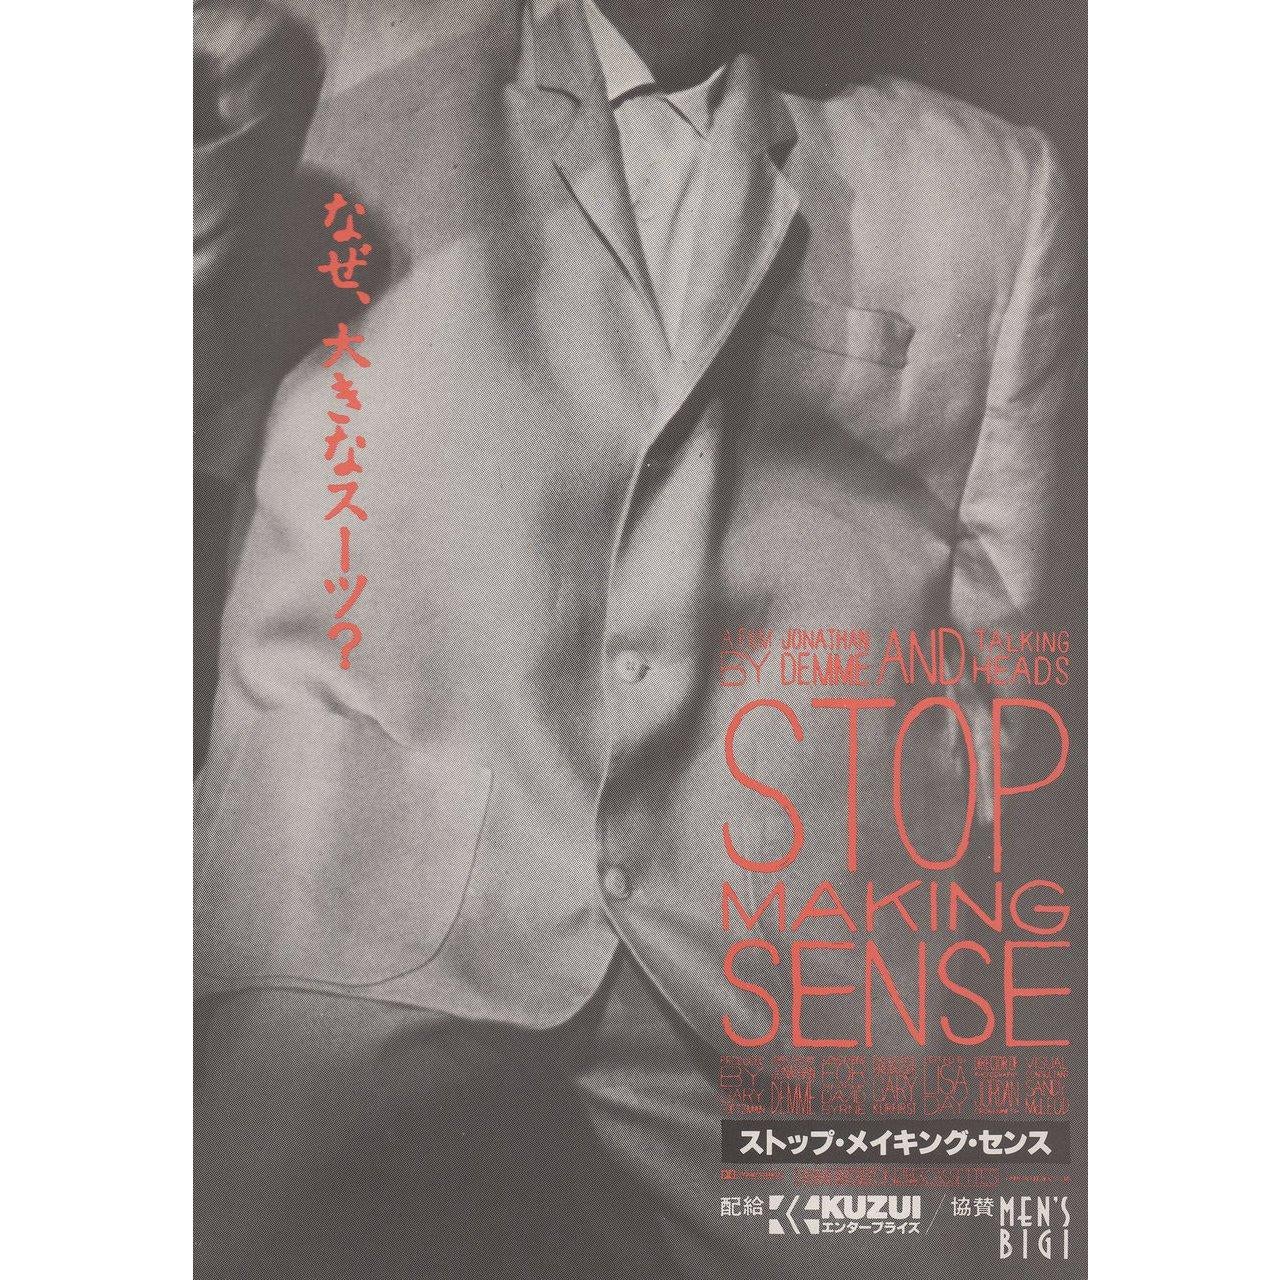 Original 1984 Japanese B5 chirashi flyer for the documentary film Stop Making Sense directed by Jonathan Demme with David Byrne / Bernie Worrell / Alex Weir / Steven Scales / Lynn Mabry. Fine condition, rolled. Please note: the size is stated in